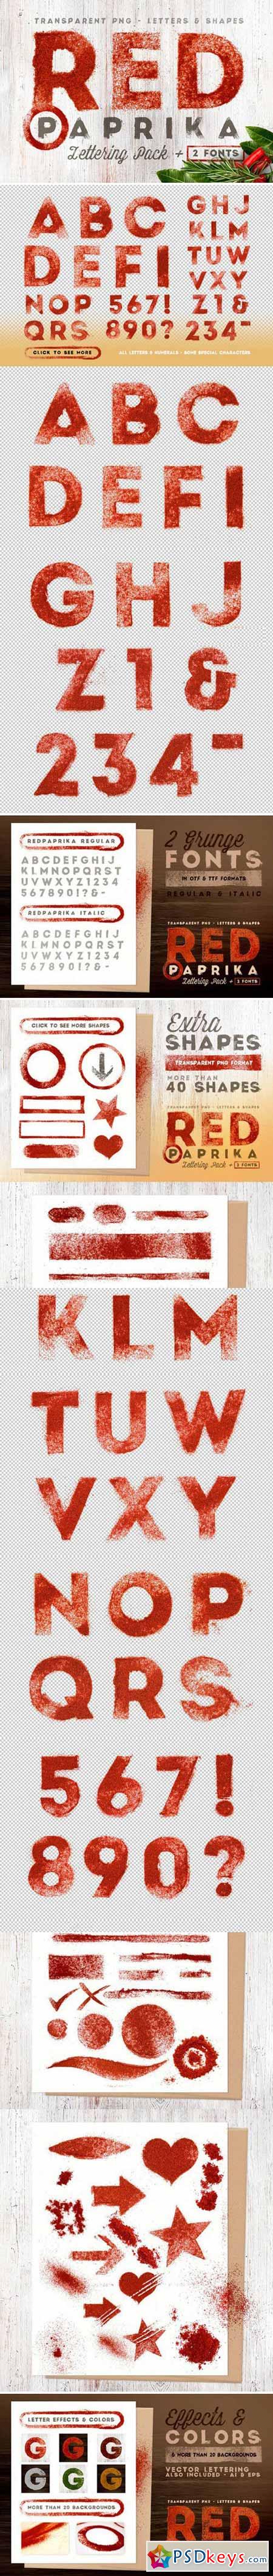 Red Paprika - Creative Lettering 286610